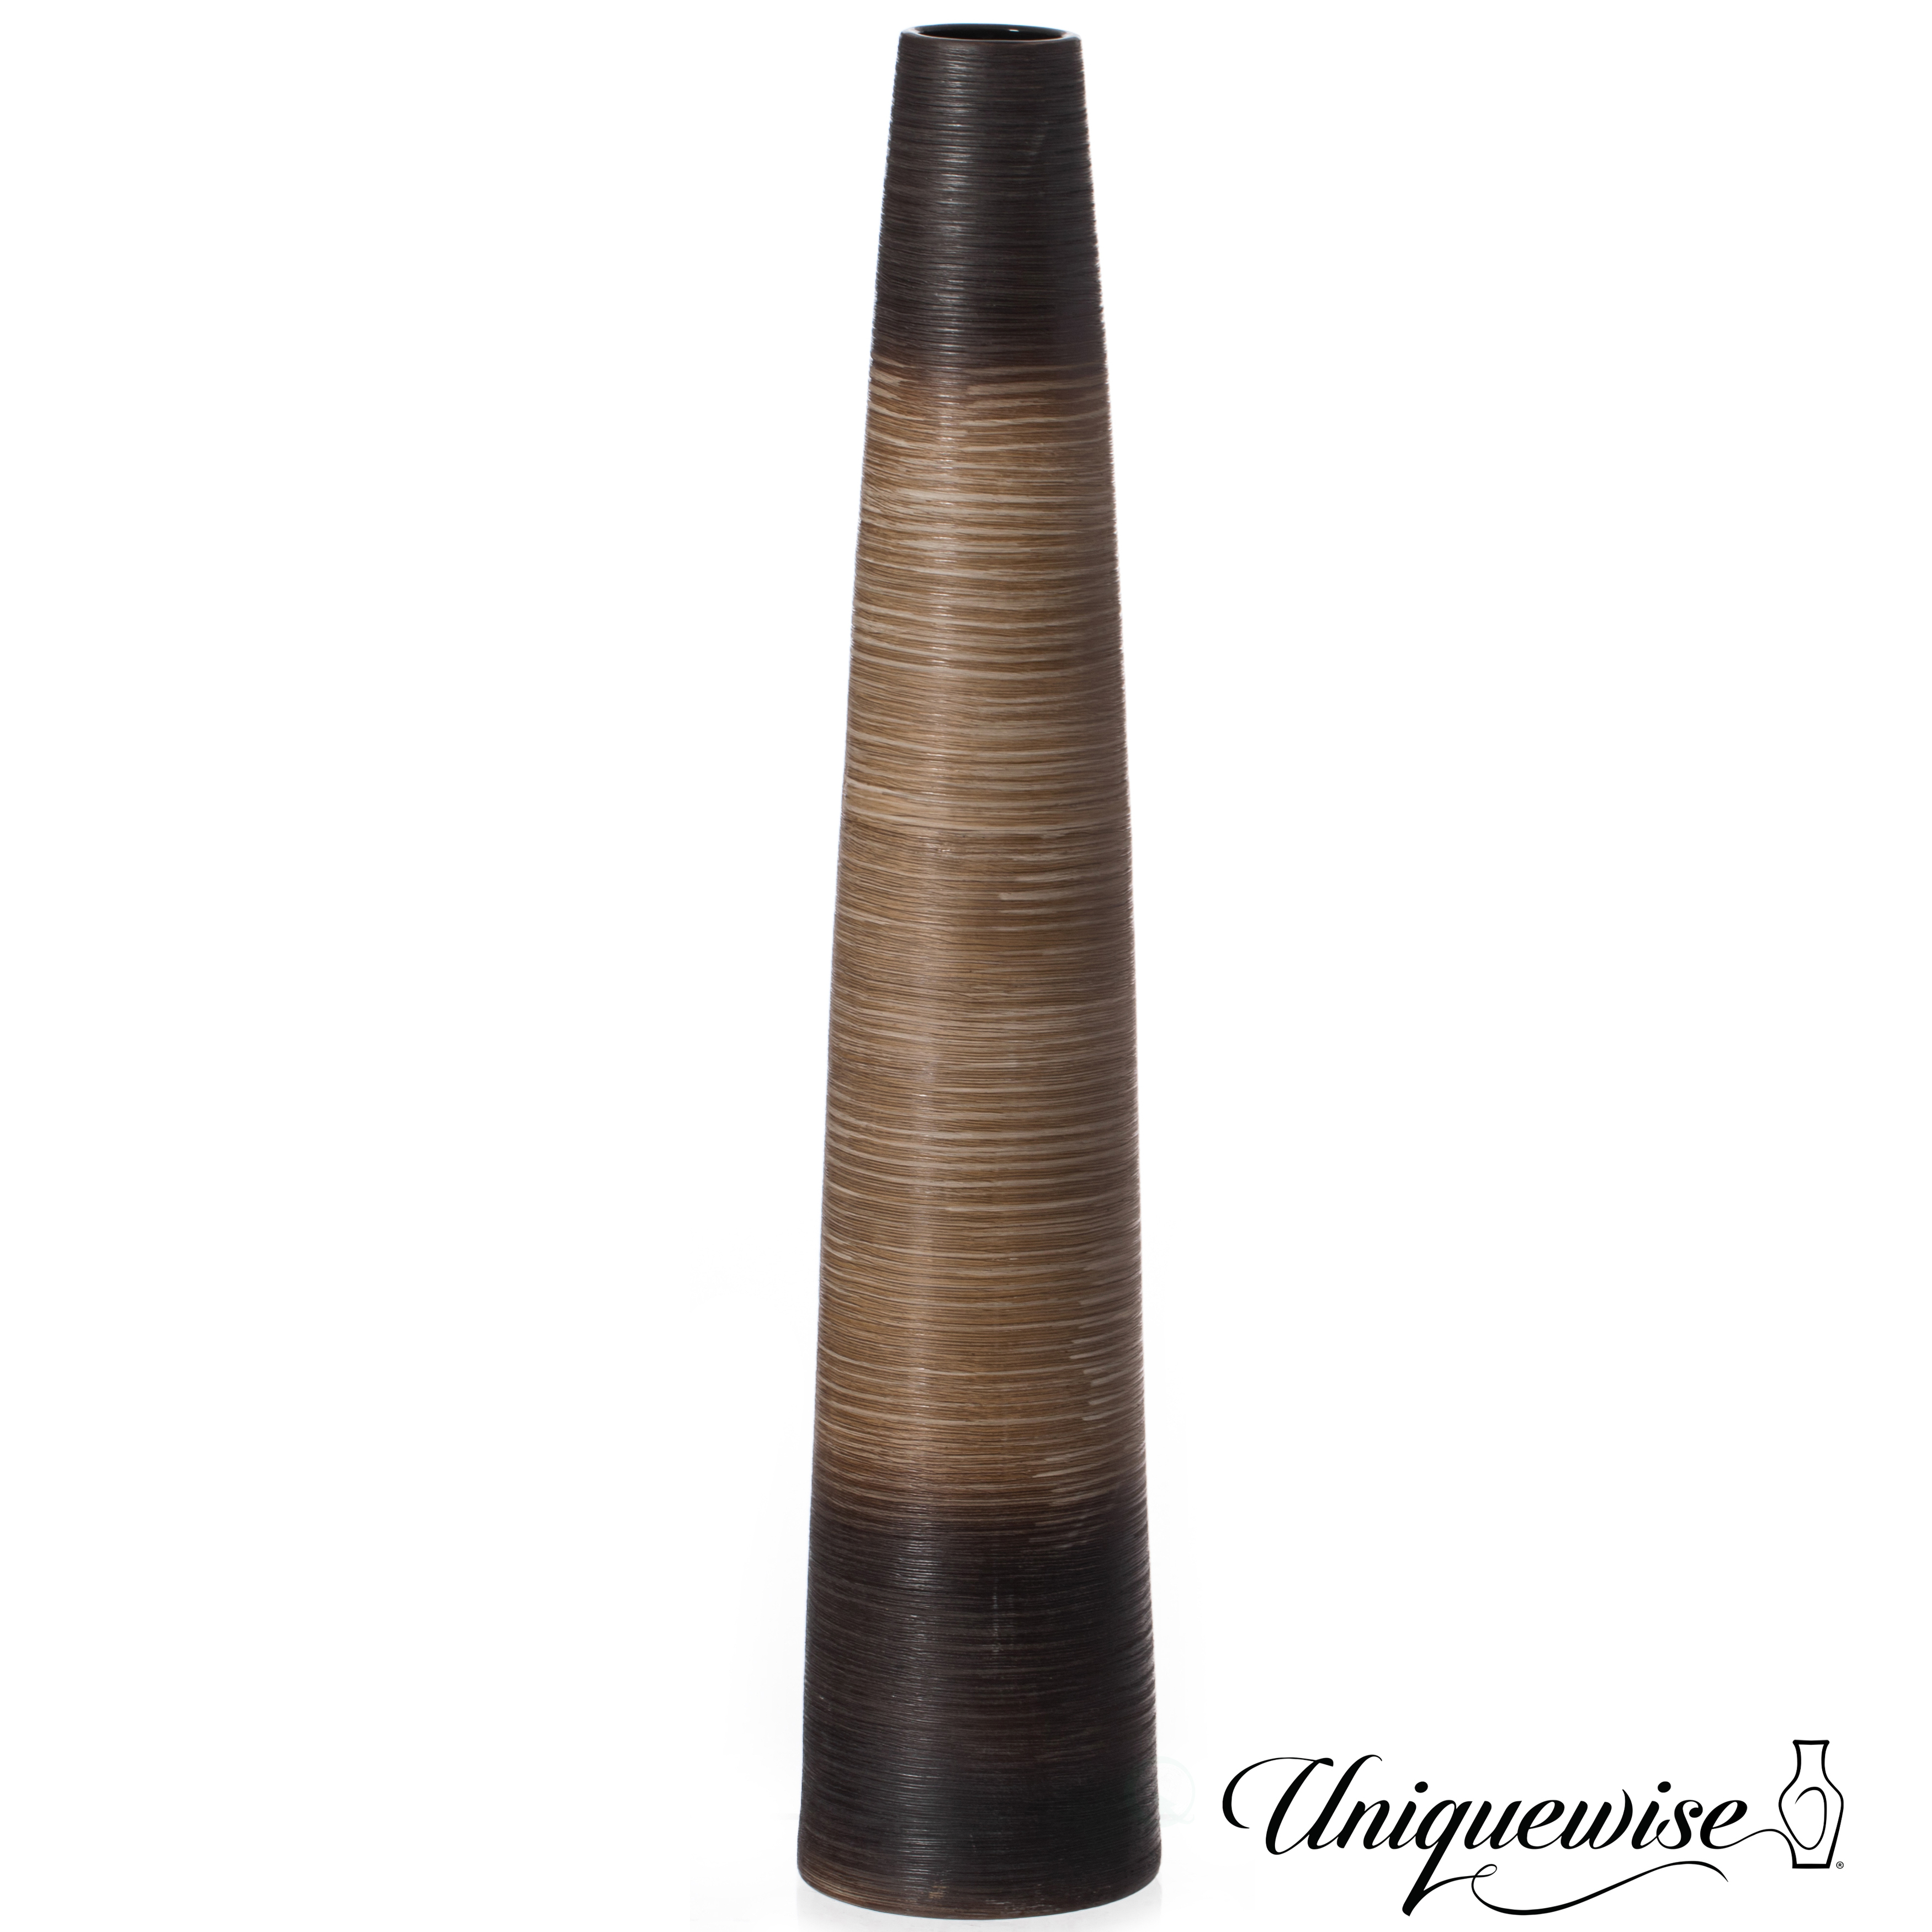 Tall Handcrafted Brown Ceramic Floor Vase - Waterproof Cylinder-Shaped Freestanding Design, Ideal For Tall Floral Arrangements - 47 In Tall